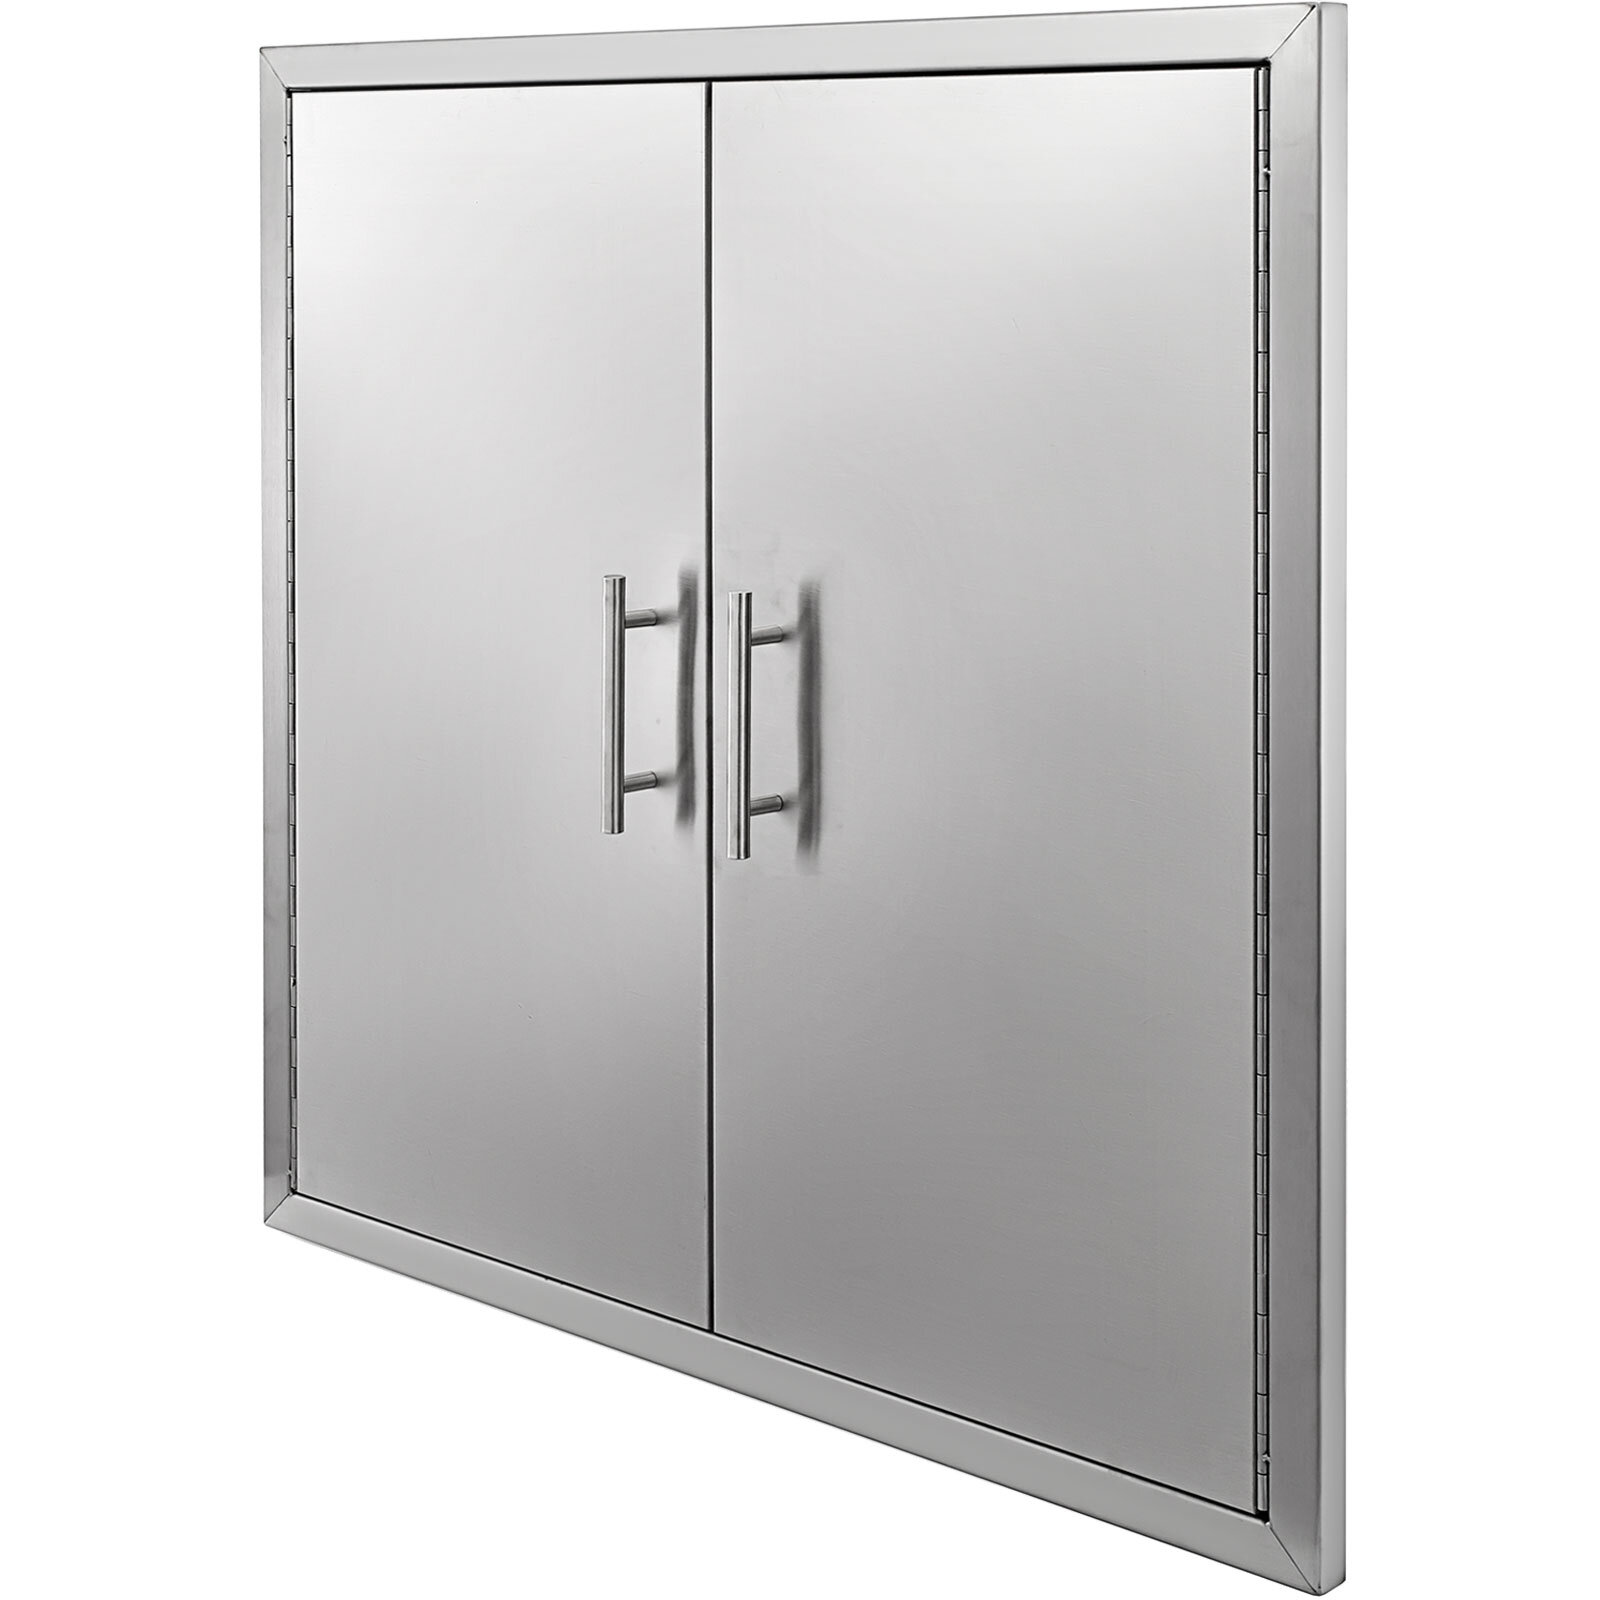 BBQ Island Stainless Steel NEW Access Door 31"W x24"H for Outdoor Kitchen 